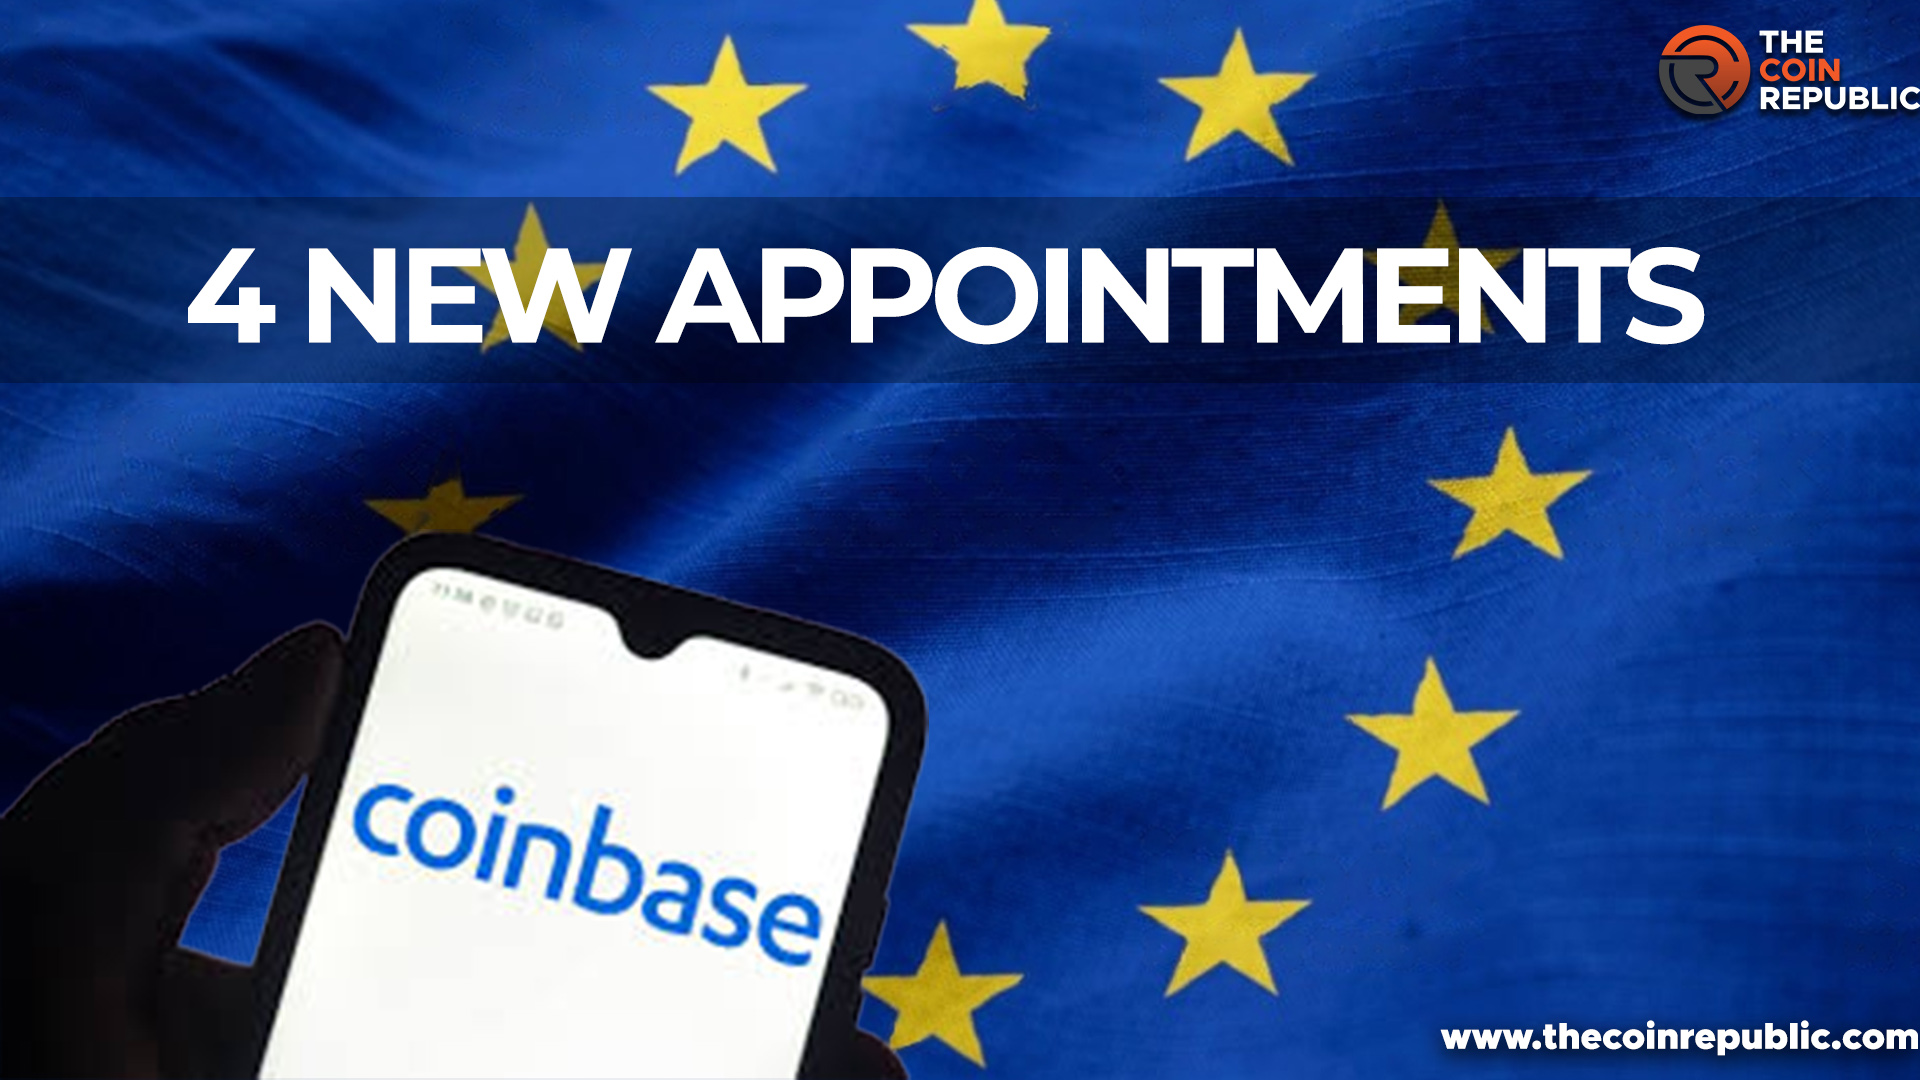 Coinbase Seeking Expansion With New Appointments